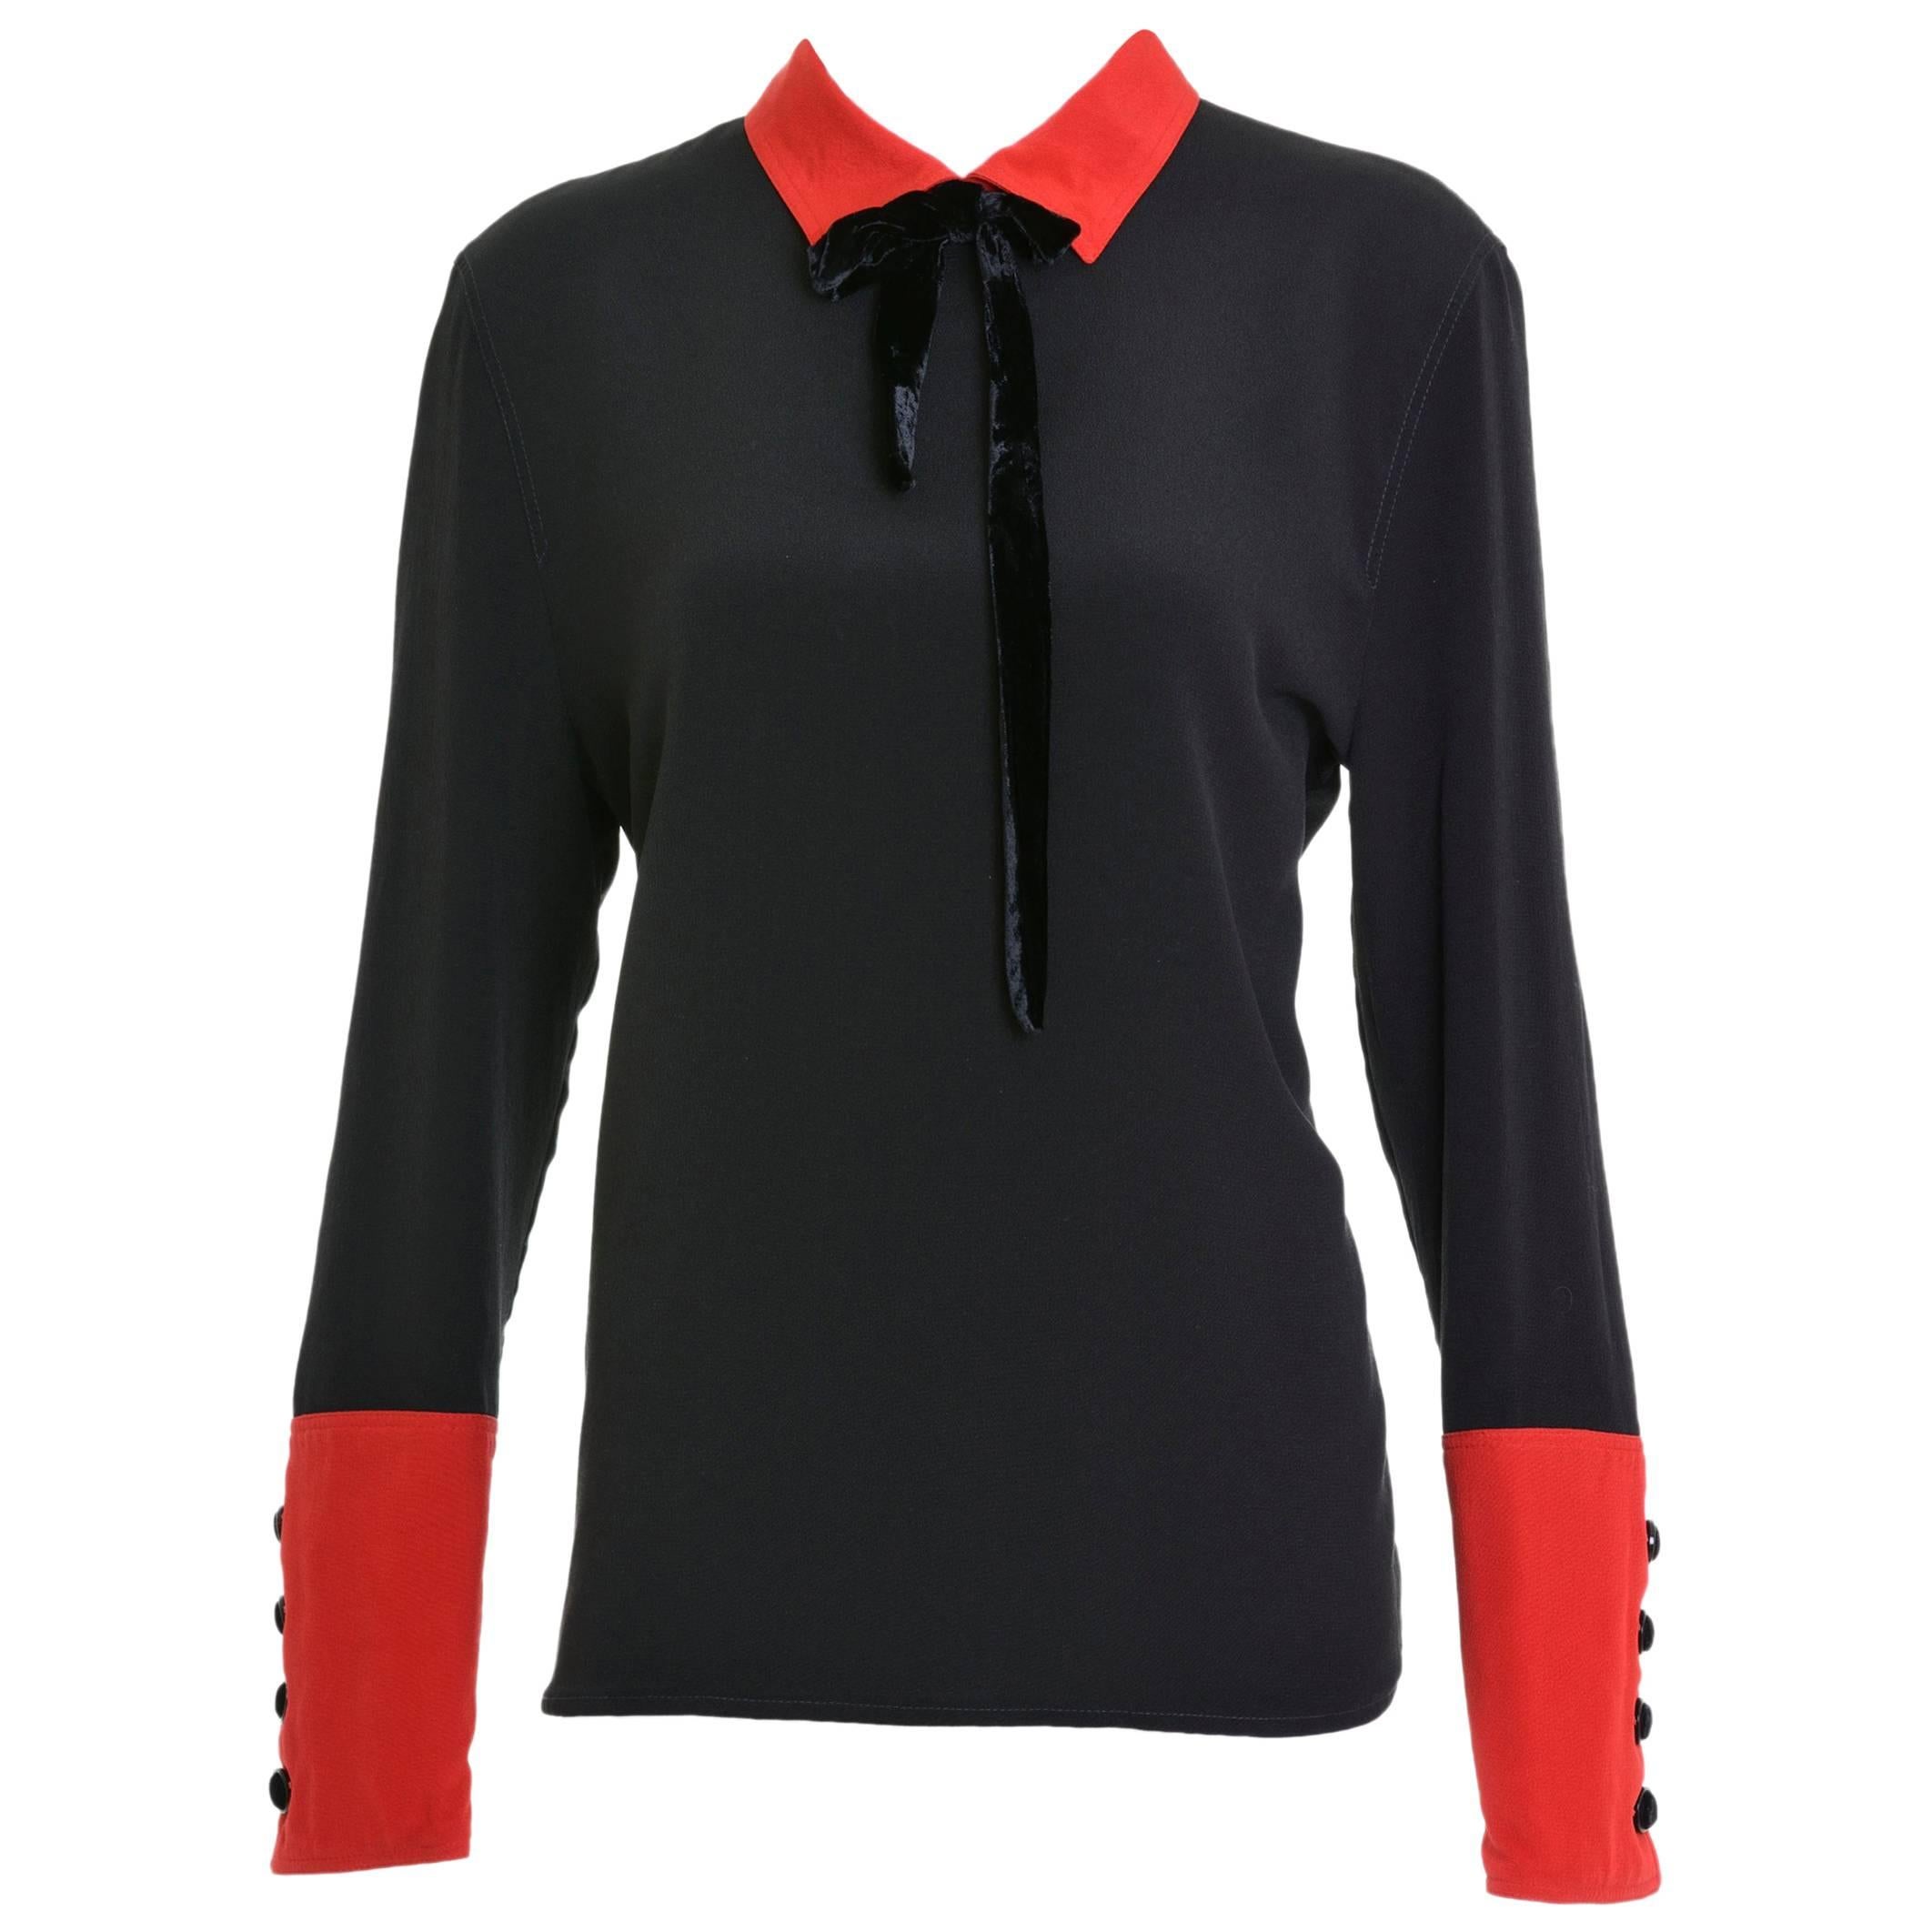 1980s VALENTINO Boutique Black and Red Silk Blouse Shirt For Sale